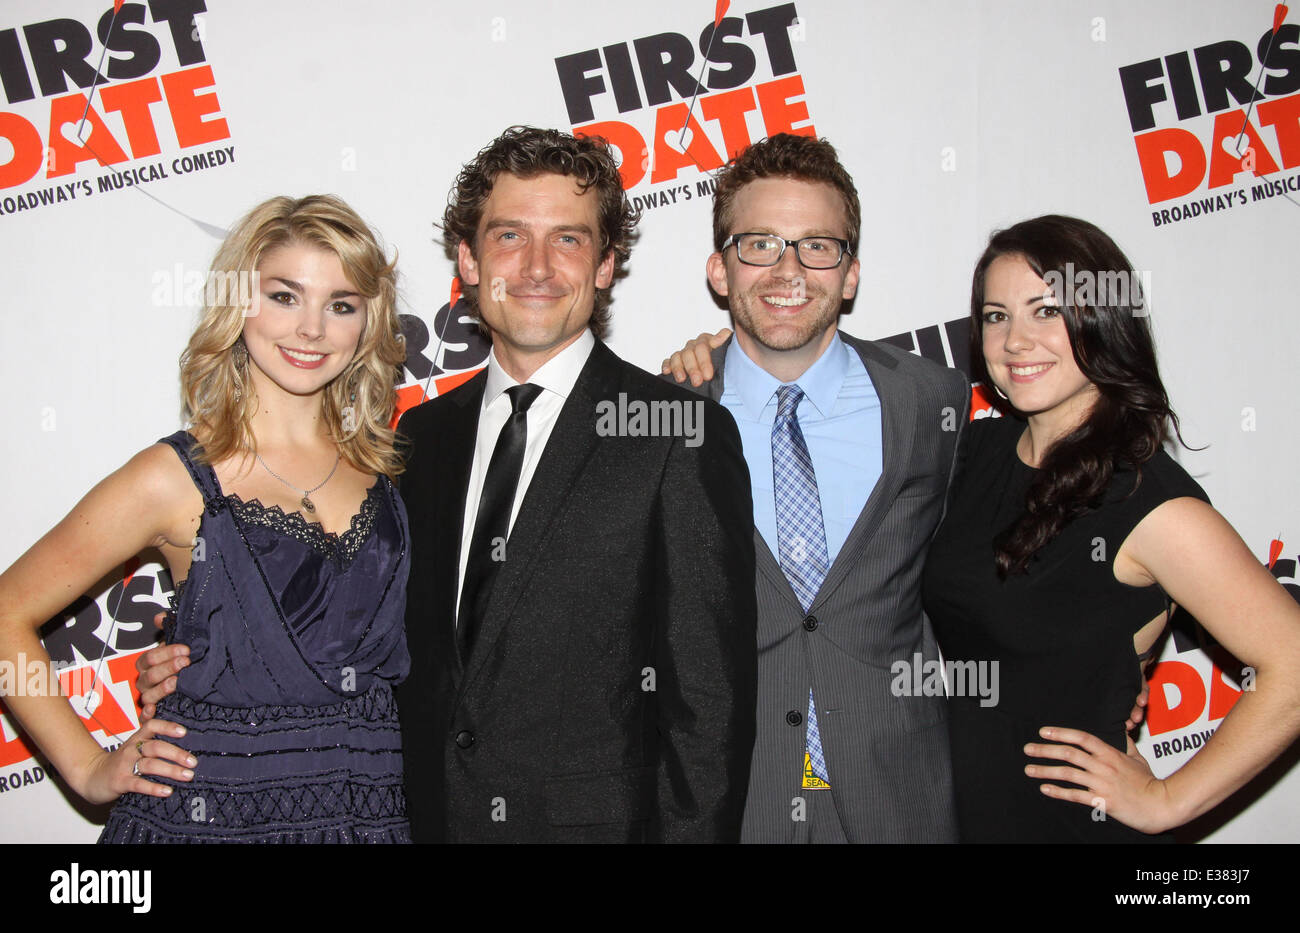 Broadway opening night after party for First Date held at Gotham Hall.  Featuring: Sydney Sheperd,Kevin Kern,Eric Ankrim,Vicki Noon Where: New York, NY, United States When: 08 Aug 2013 Stock Photo